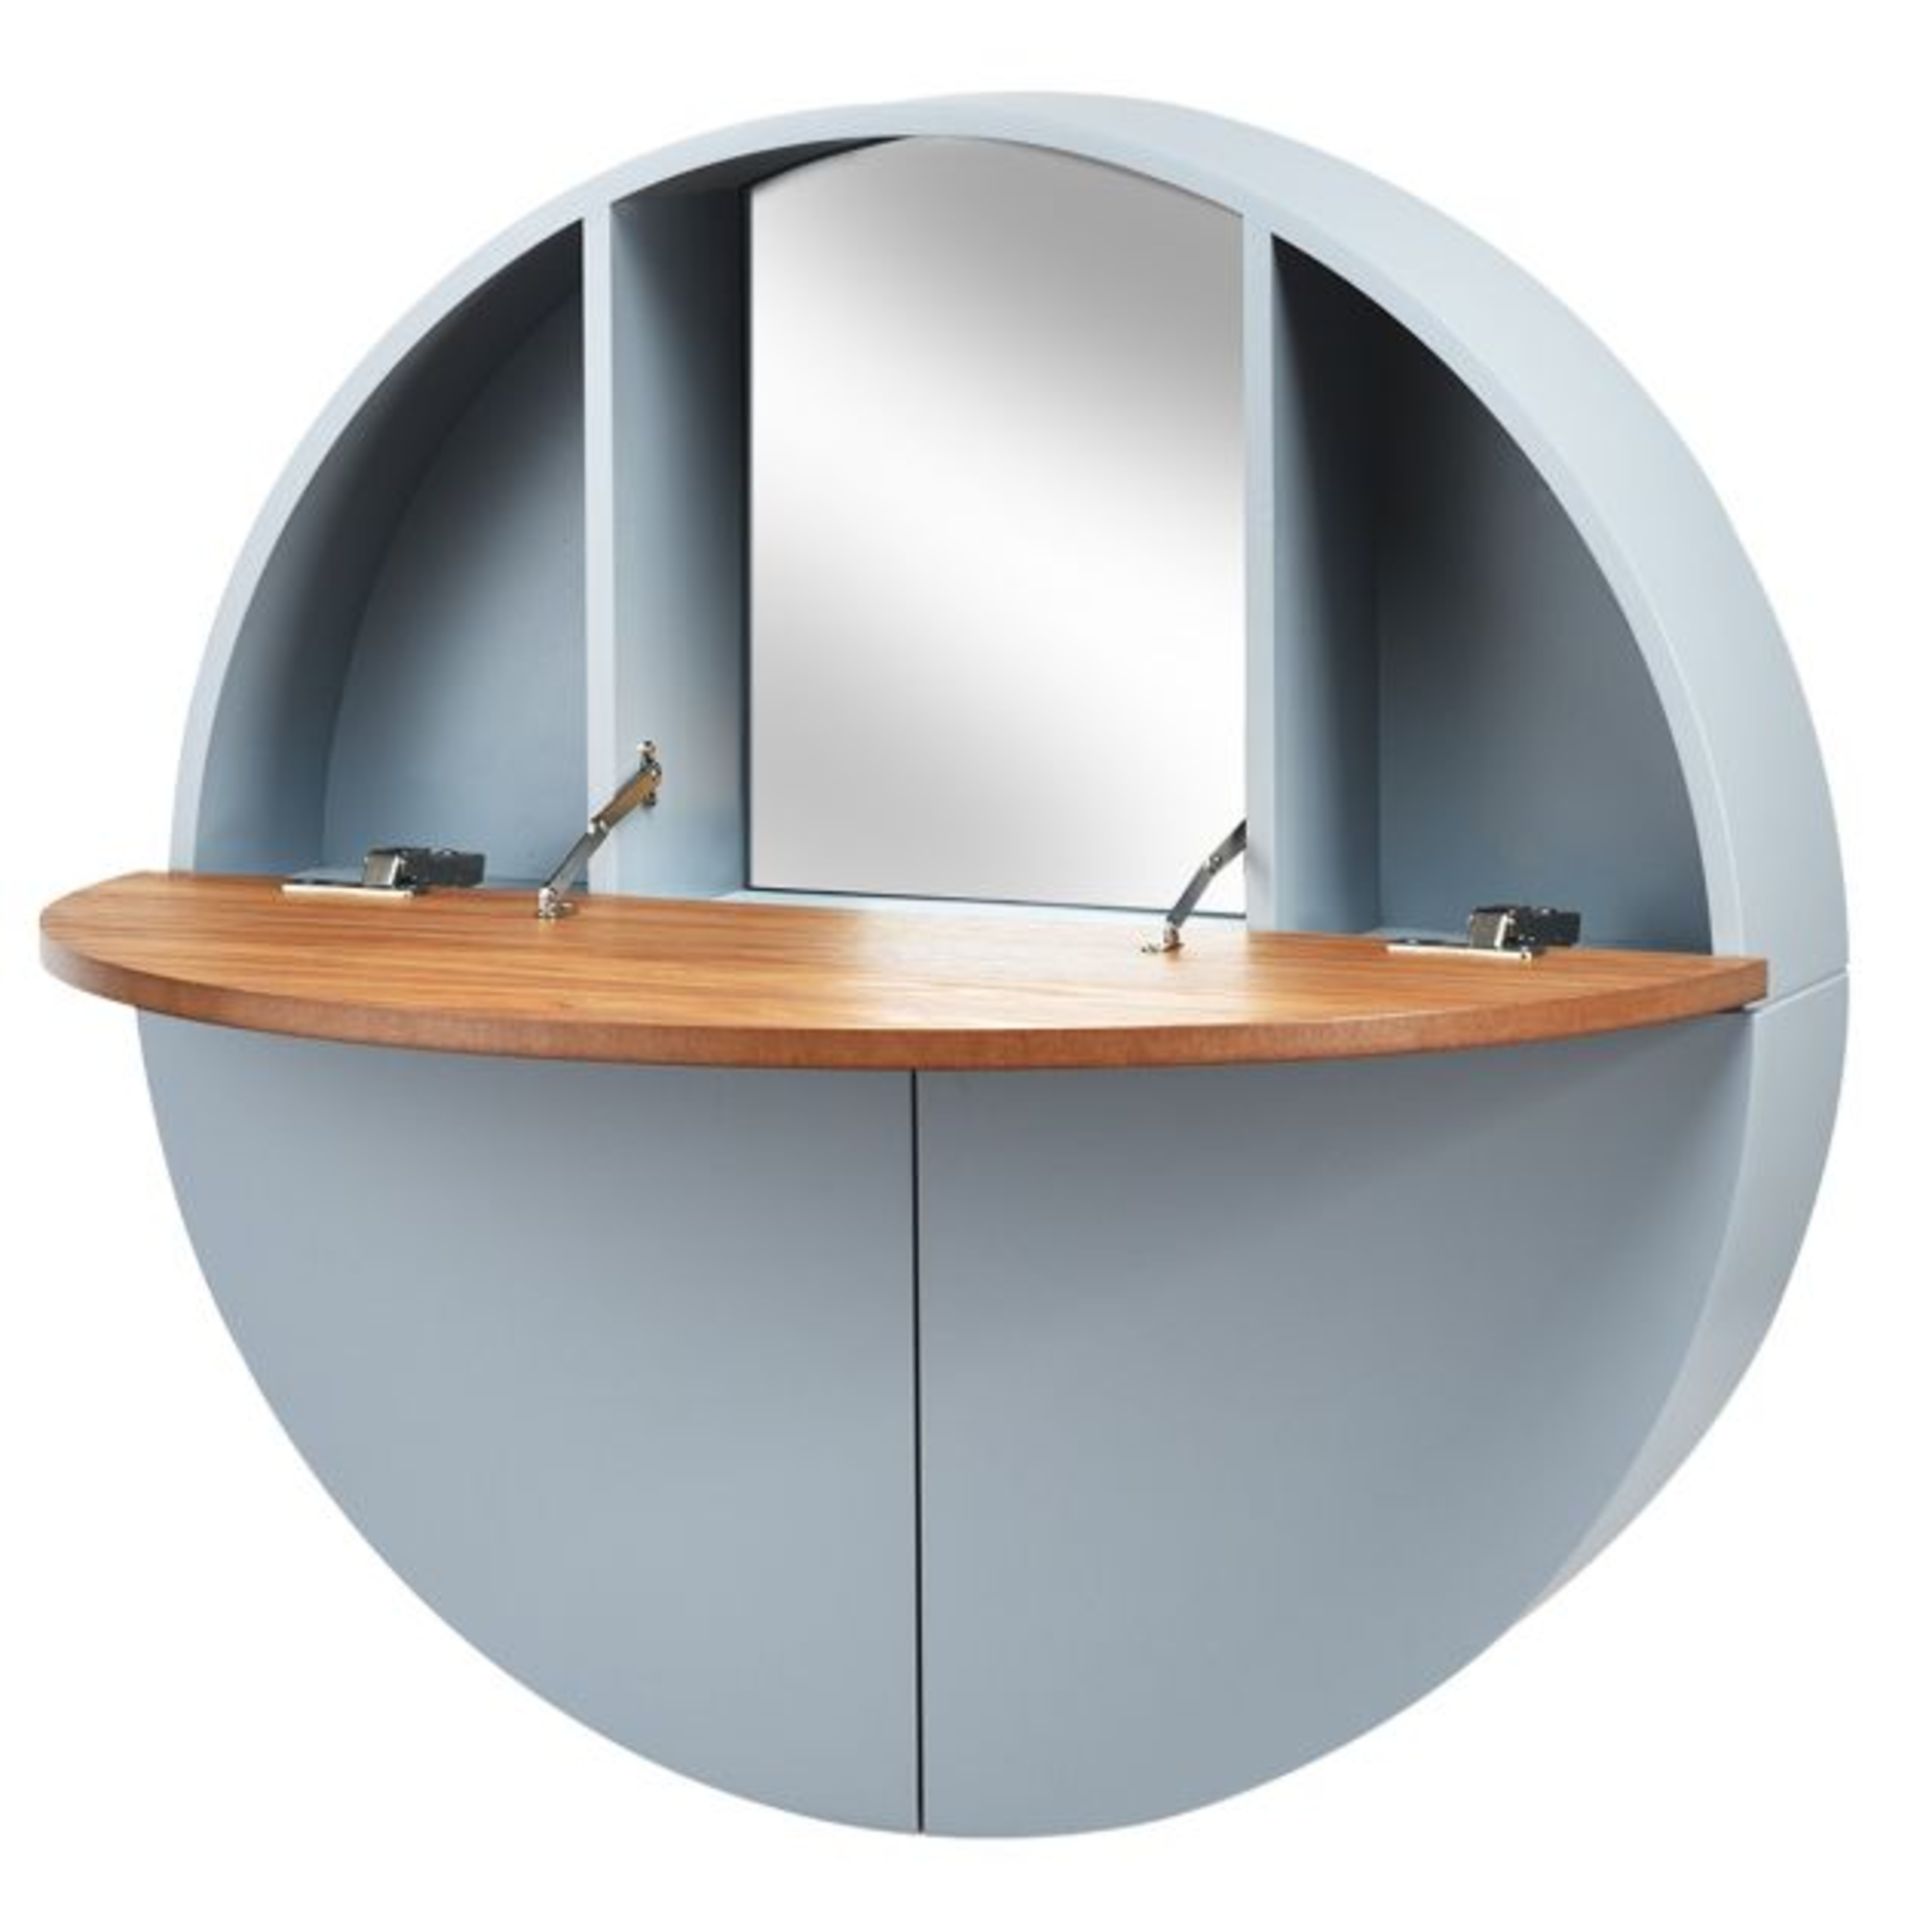 Gray Round Wall Dressing Table With 7 Compartments And 1 Mirror 72 X 72 X 15 Cm RRP £83.98 (LOCATION